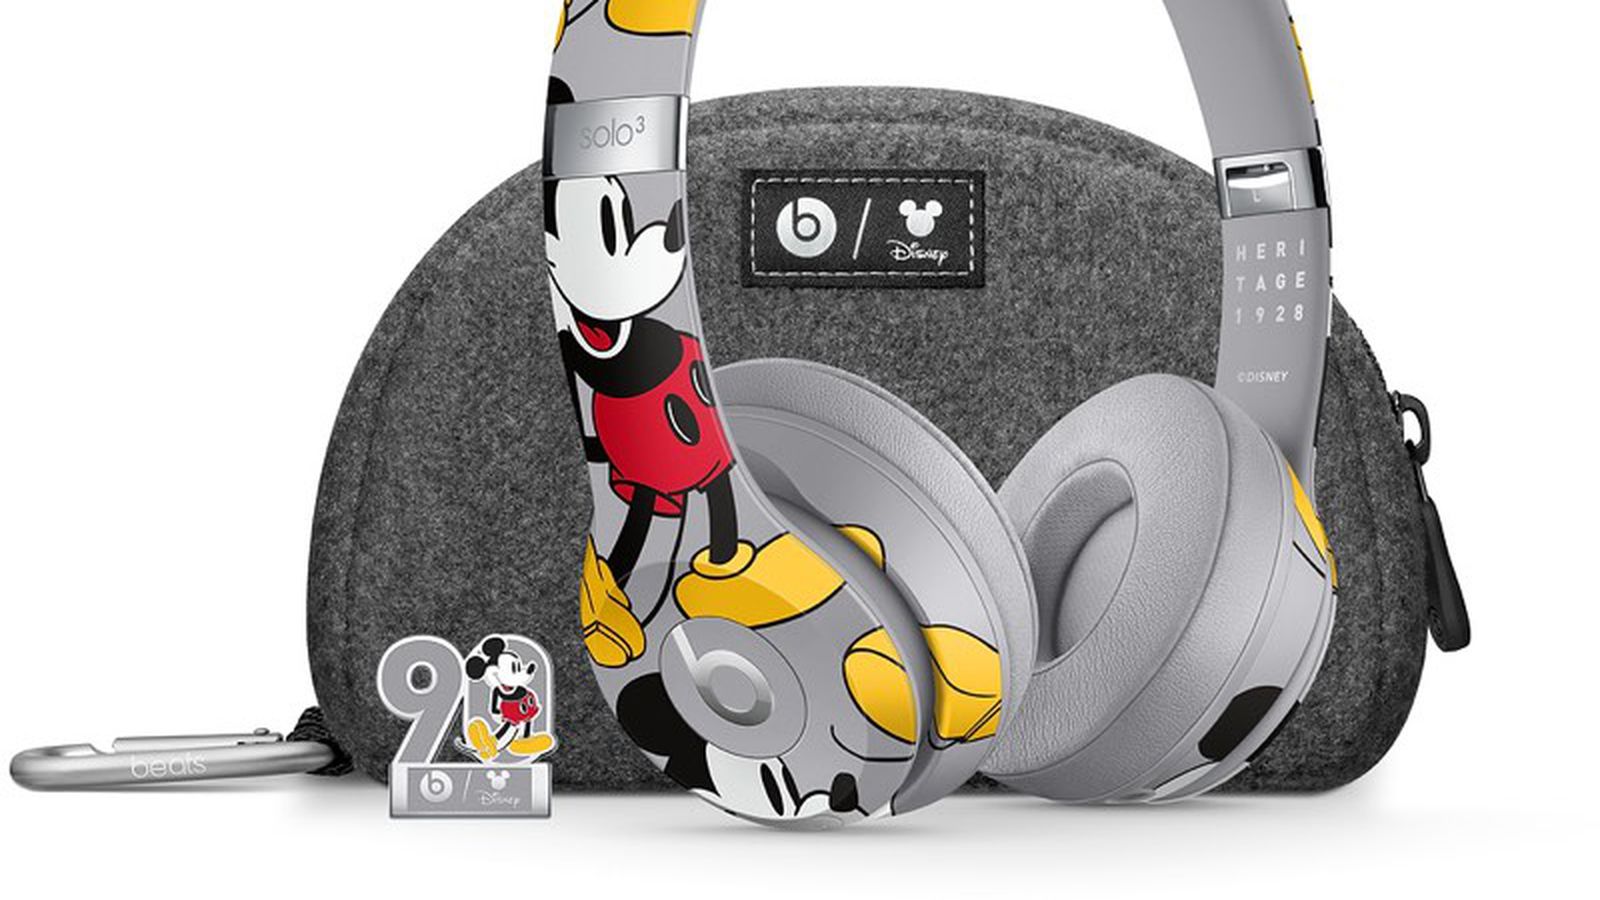 Apple Debuts Limited Edition Mickey Mouse Beats Solo 3 Headphones Created in Collaboration With Disney -